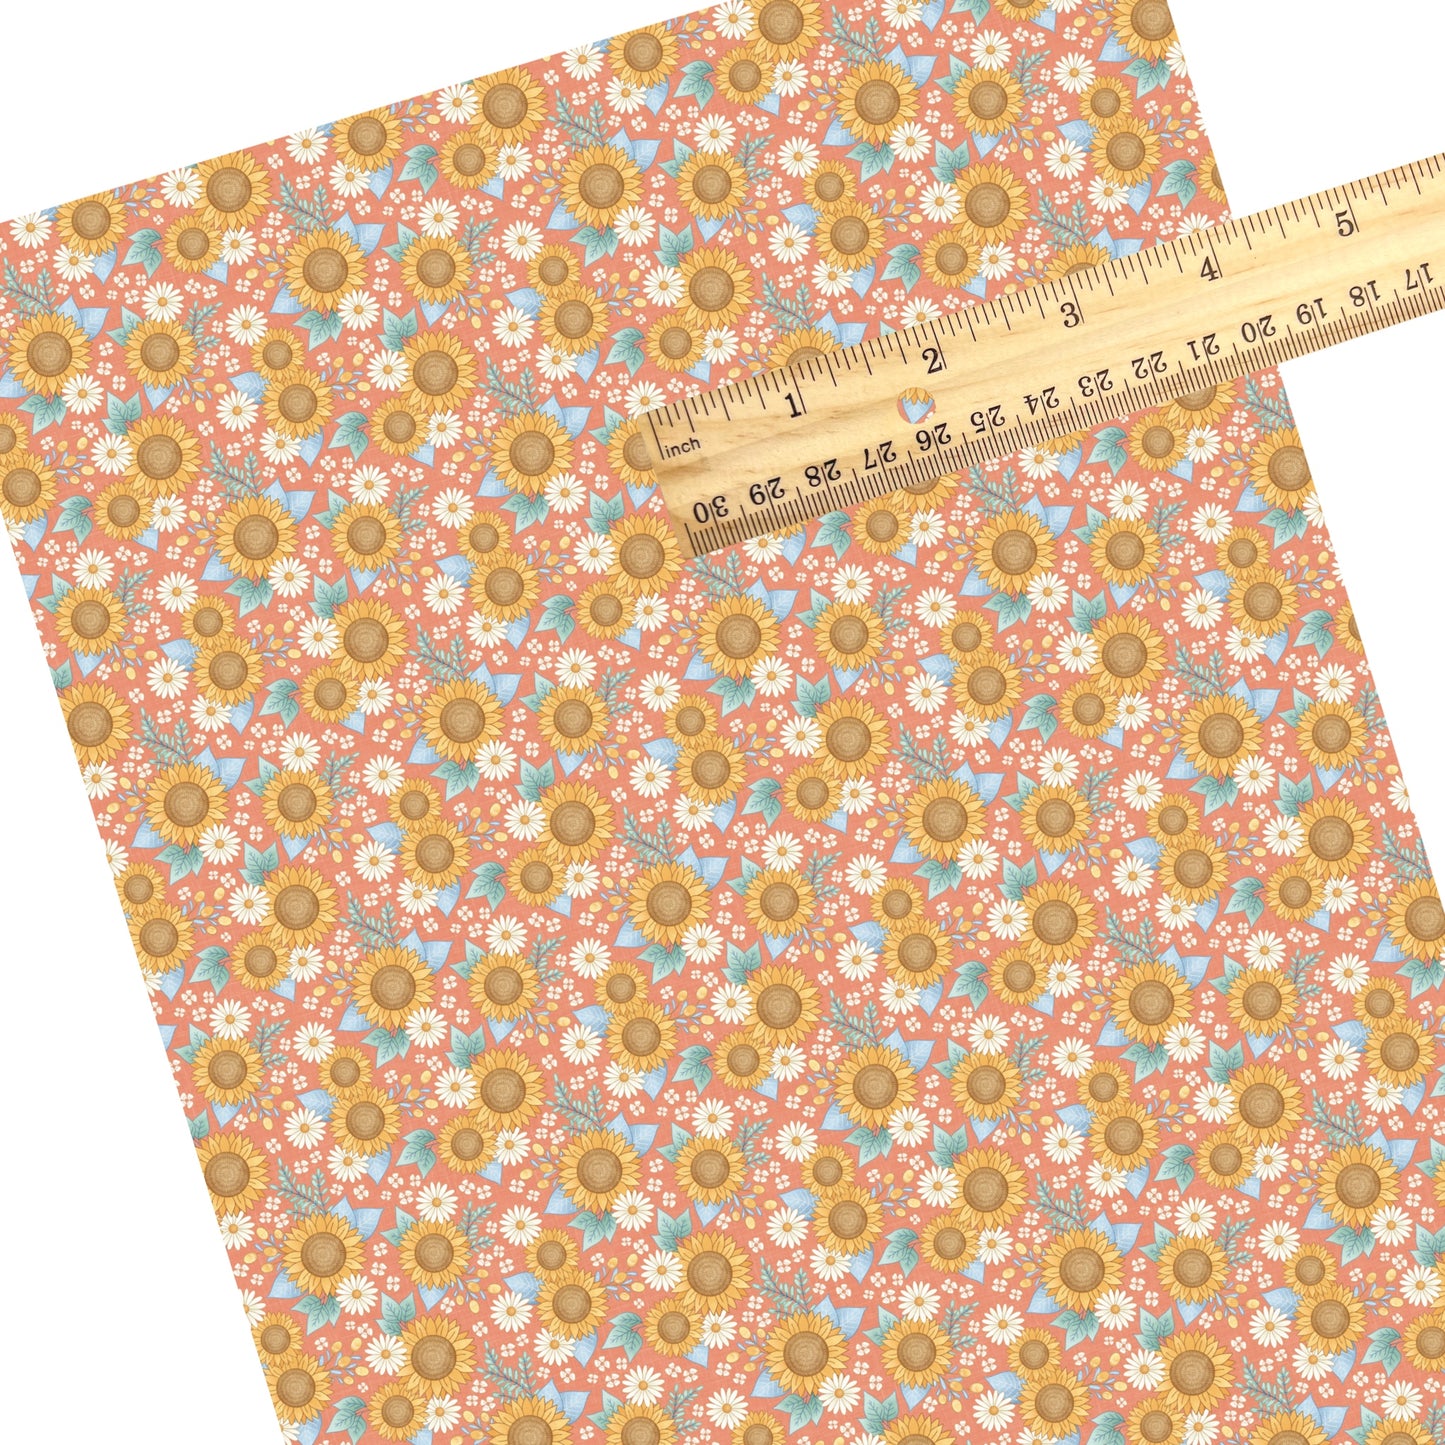 These summer faux leather sheets contain the following design elements: sunflowers on terracotta. Our CPSIA compliant faux leather sheets or rolls can be used for all types of crafting projects.